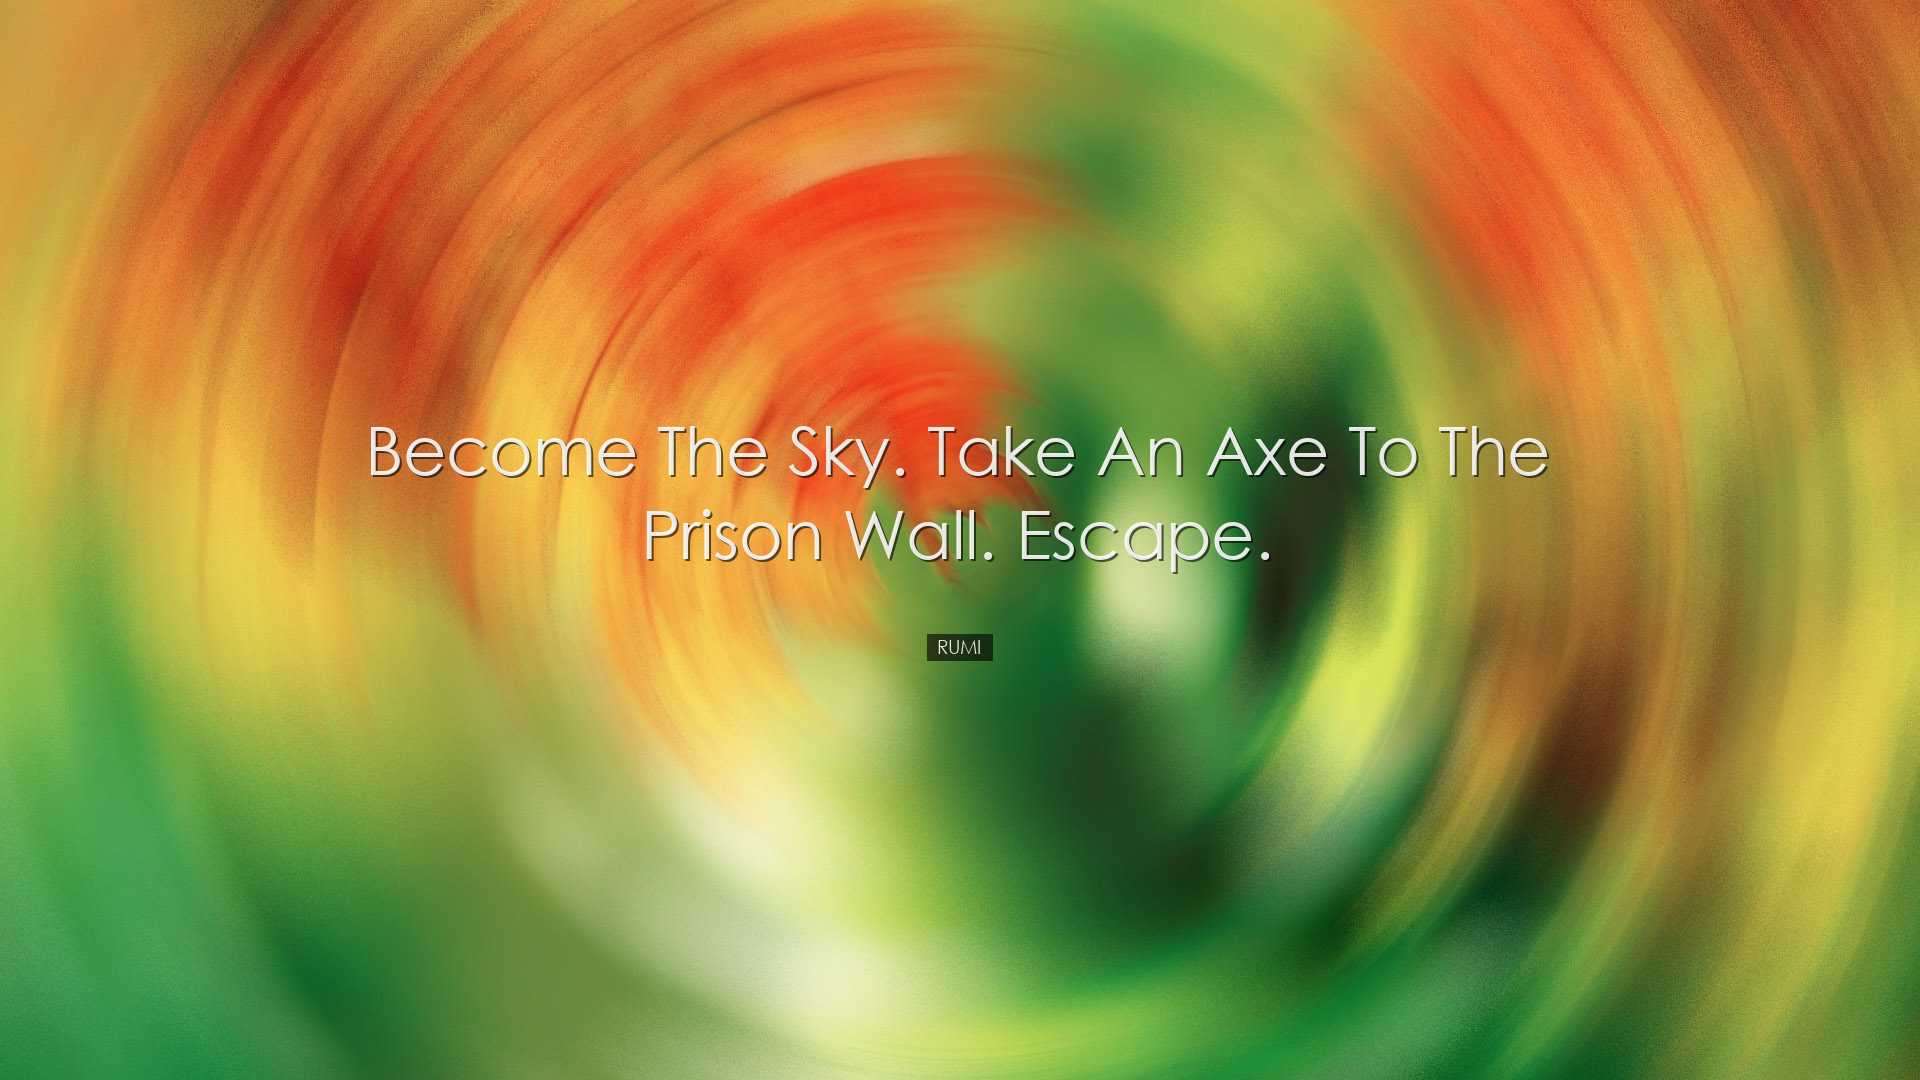 Become the sky. Take an axe to the prison wall. Escape. - Rumi